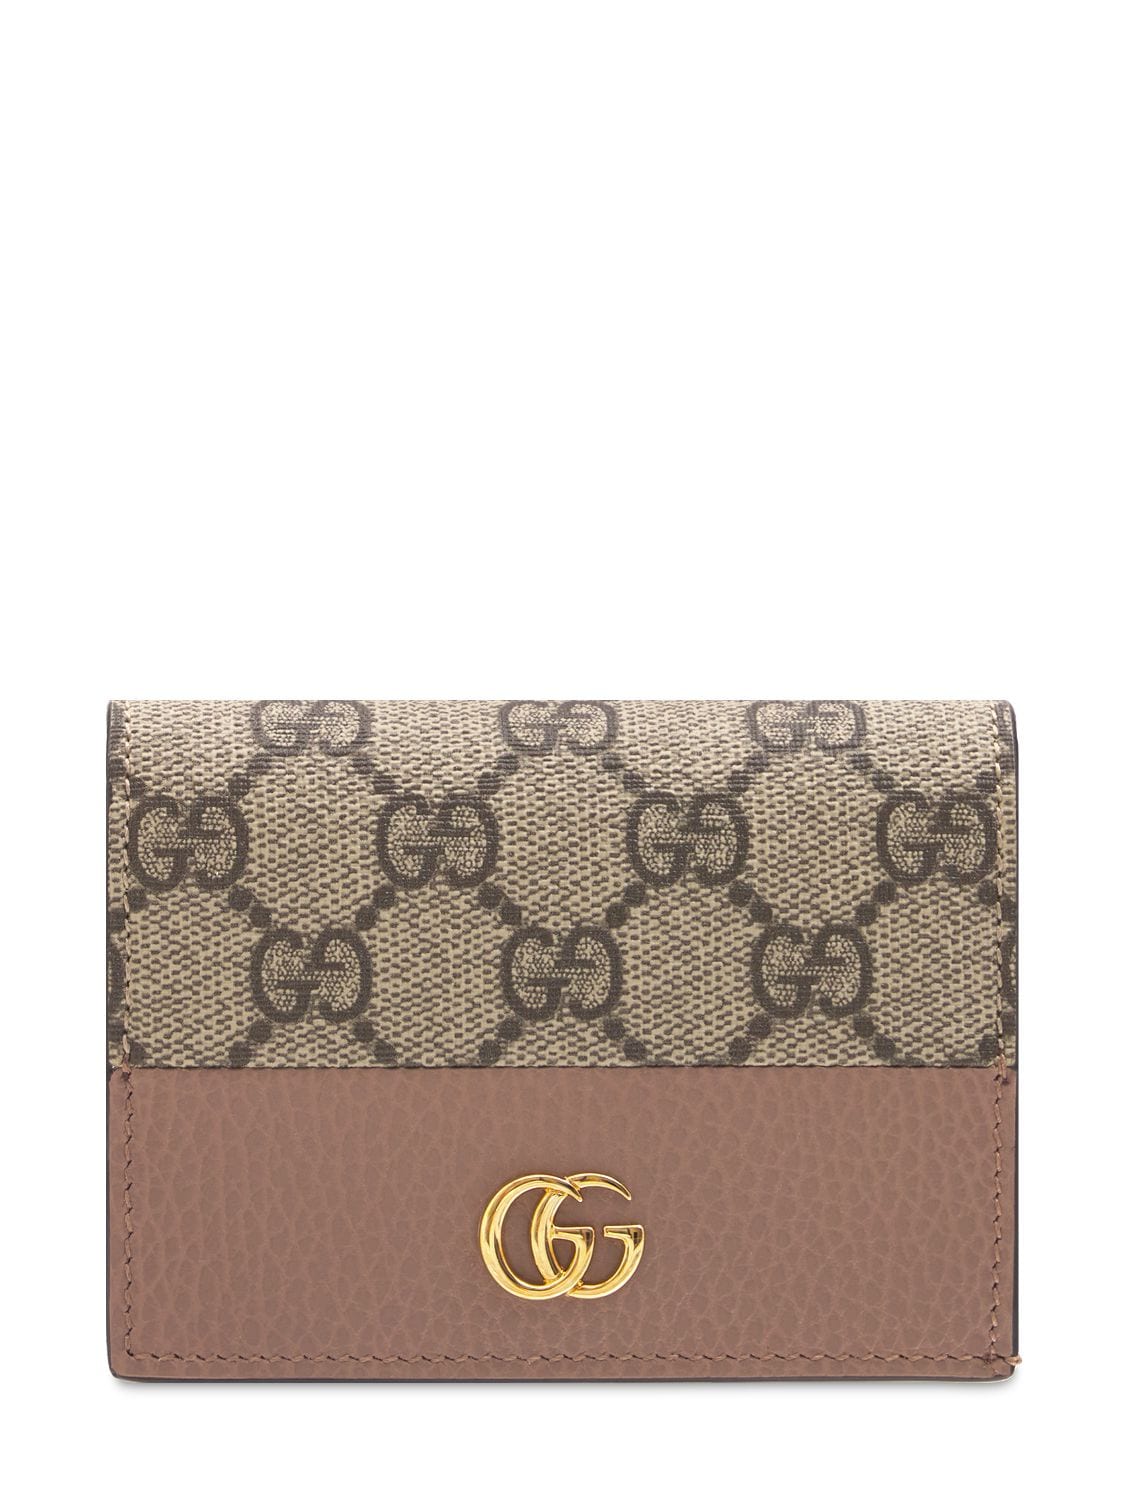 Gg Marmont Canvas & Leather Wallet